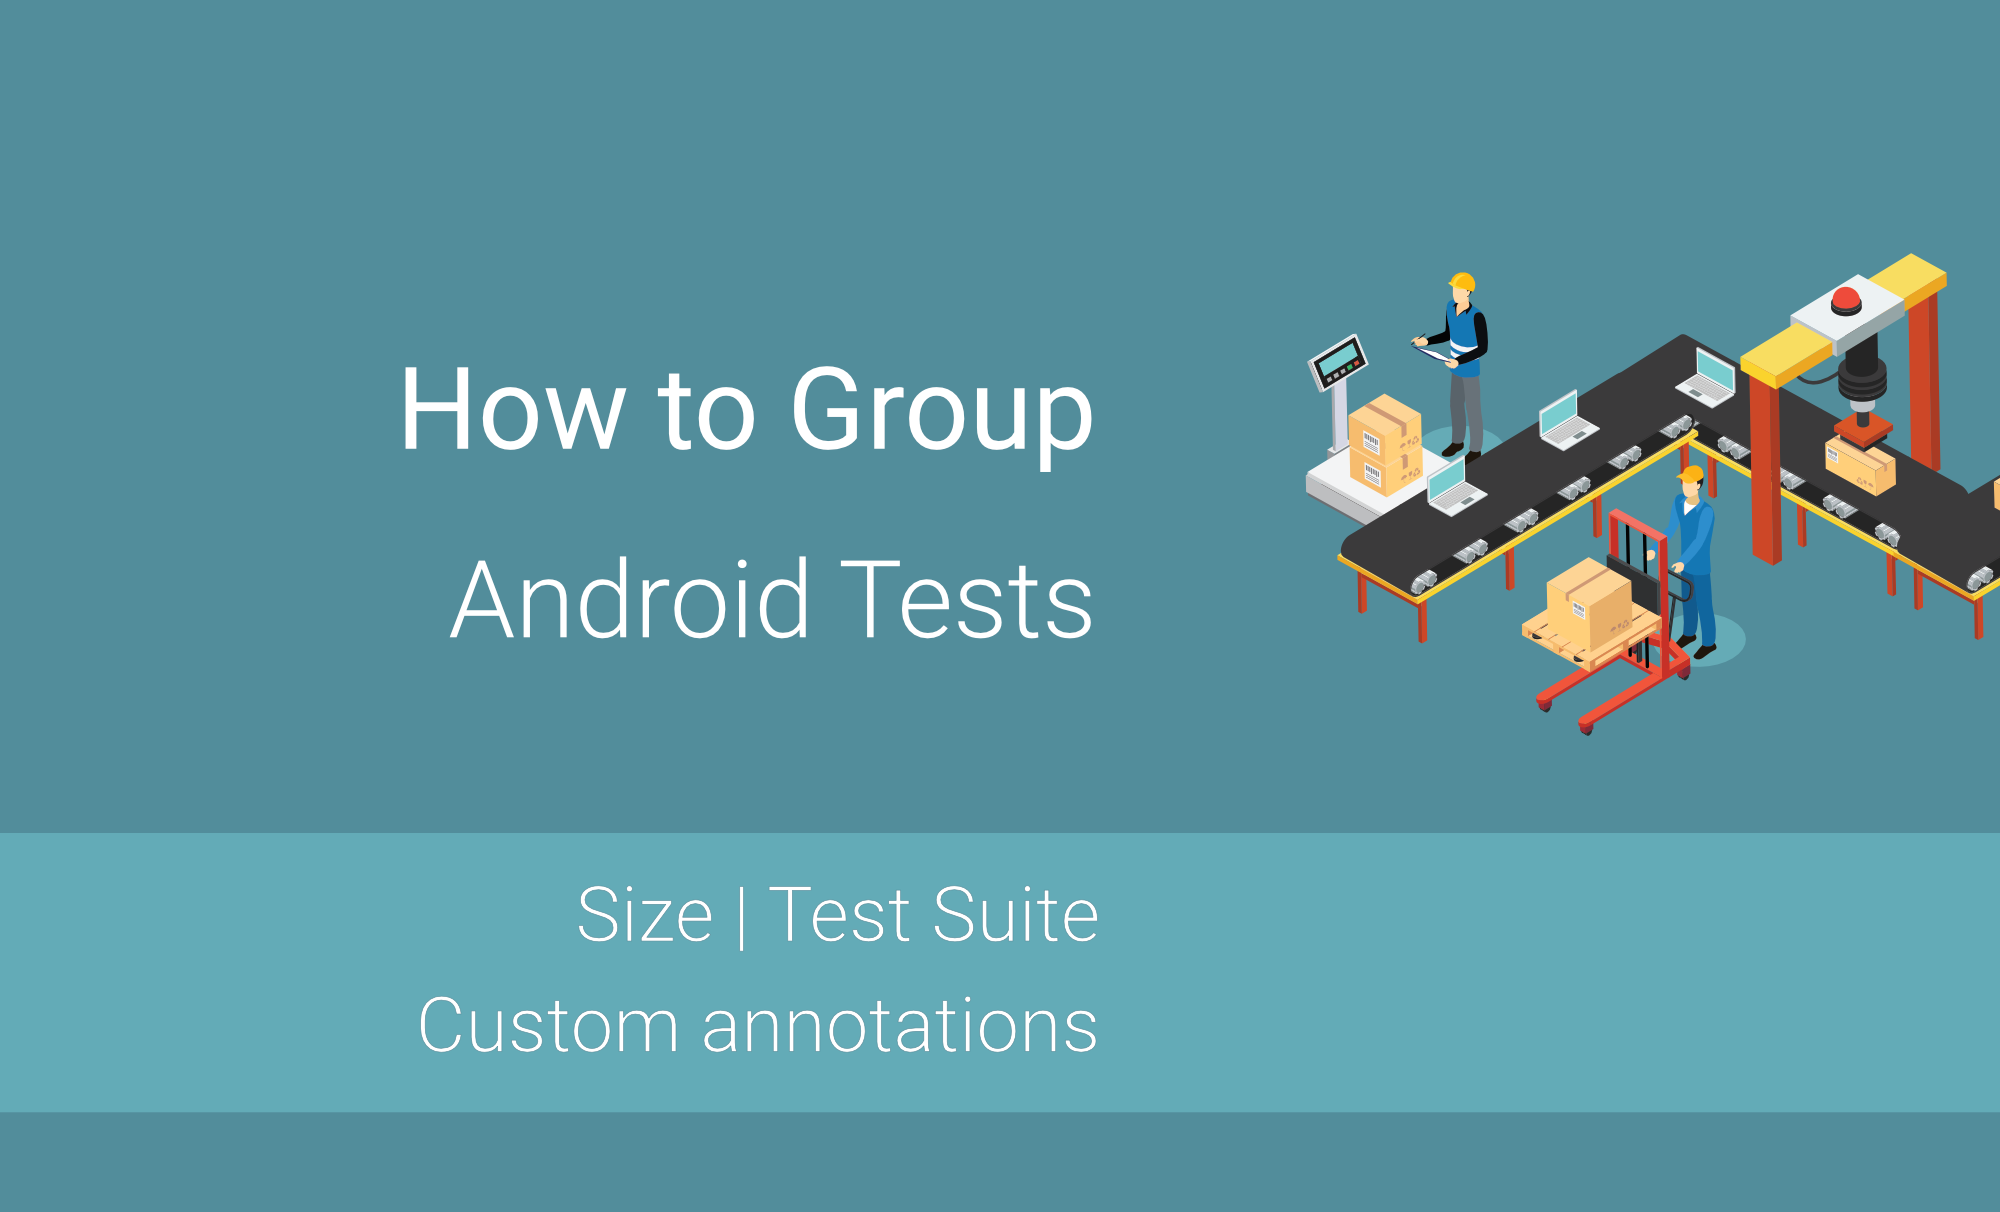 How to group Android tests